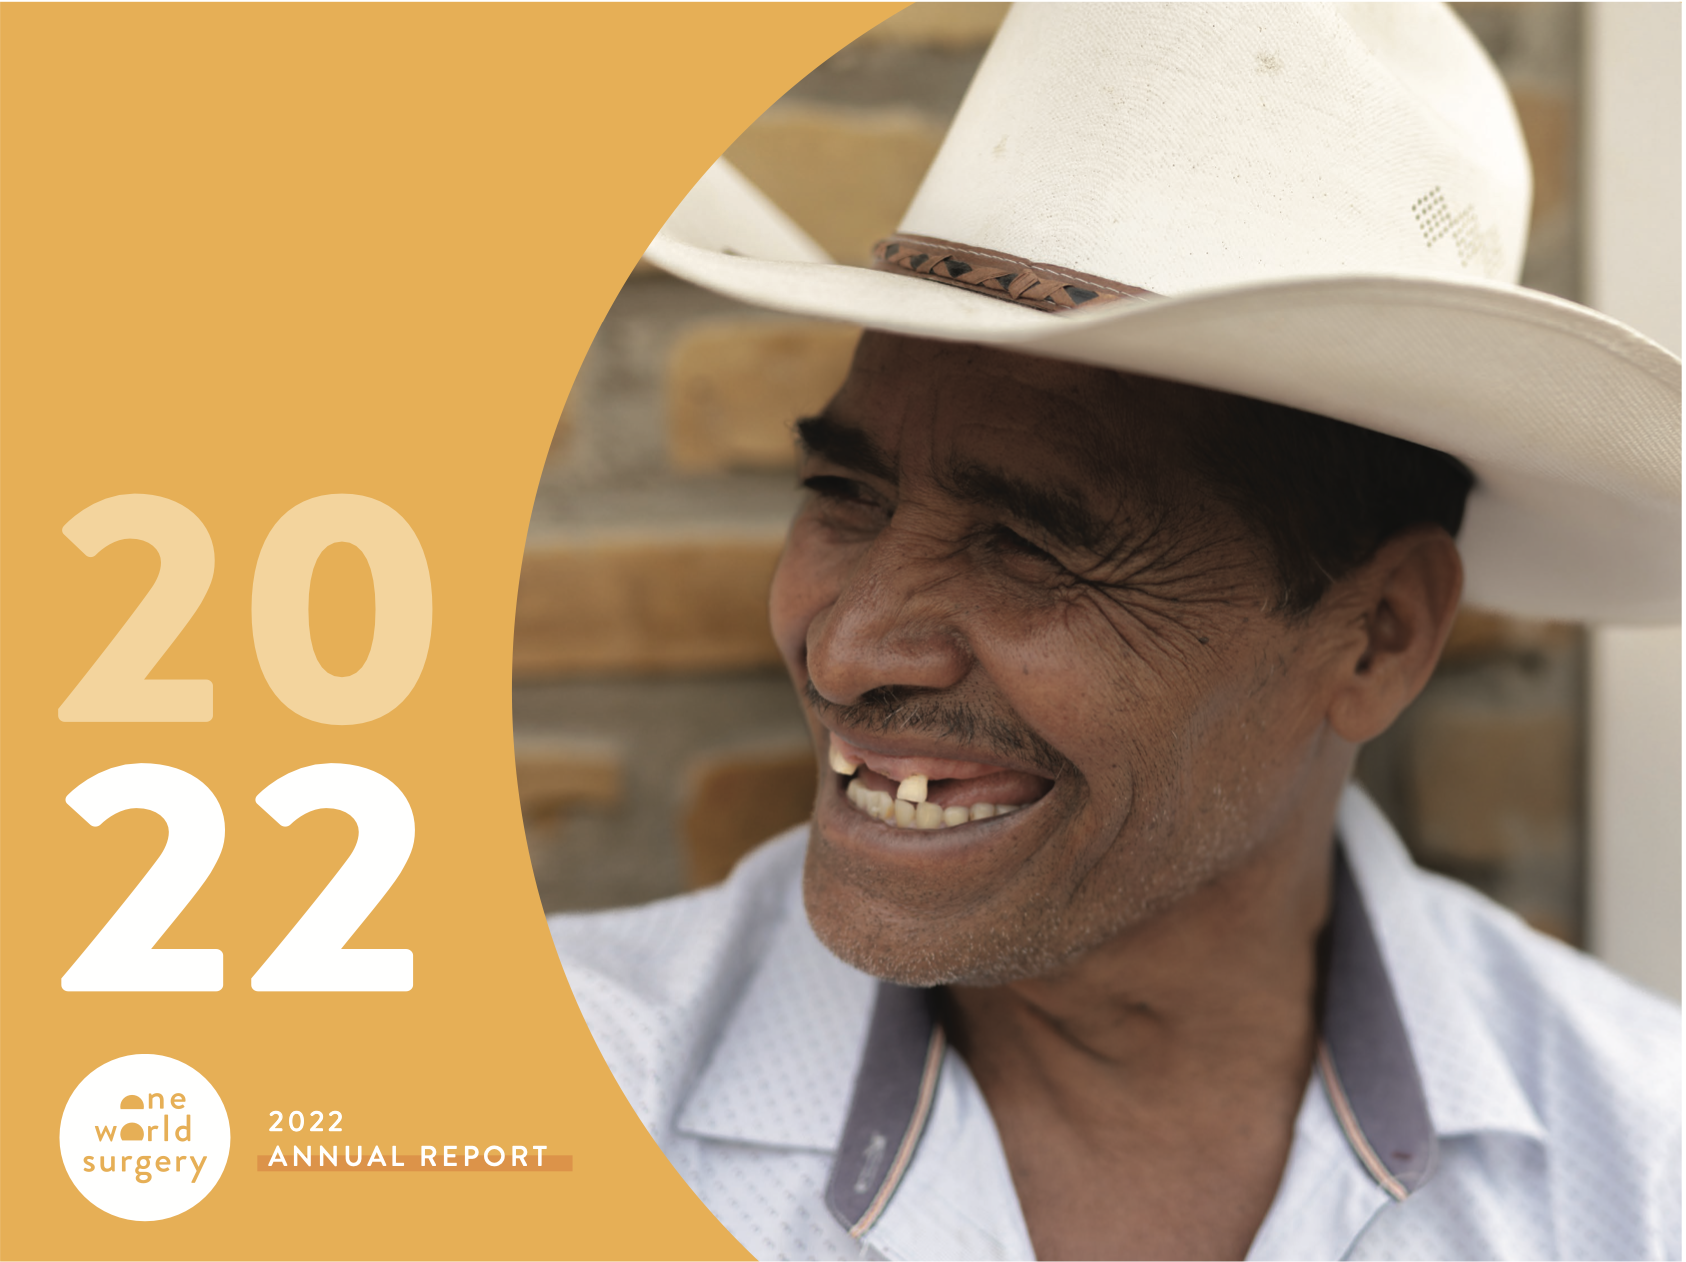 2022 Impact Report cover photo featuring a smiling man in a cowboy hat